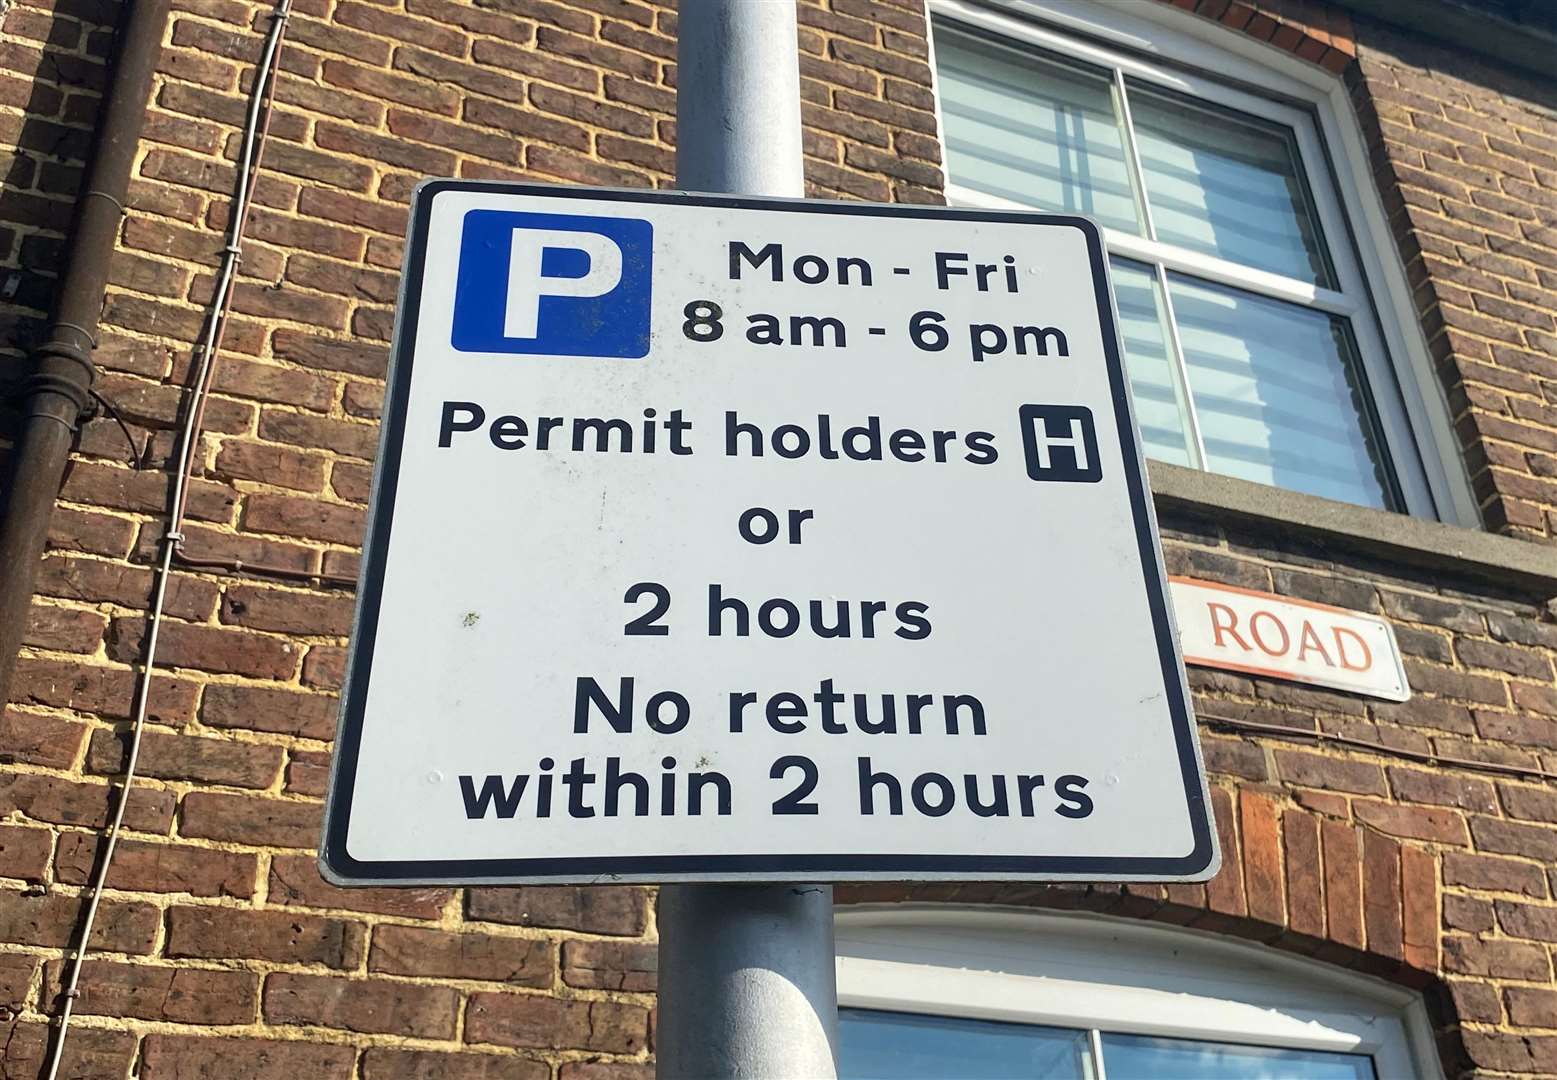 Drivers can park for free for two hours or have a permit